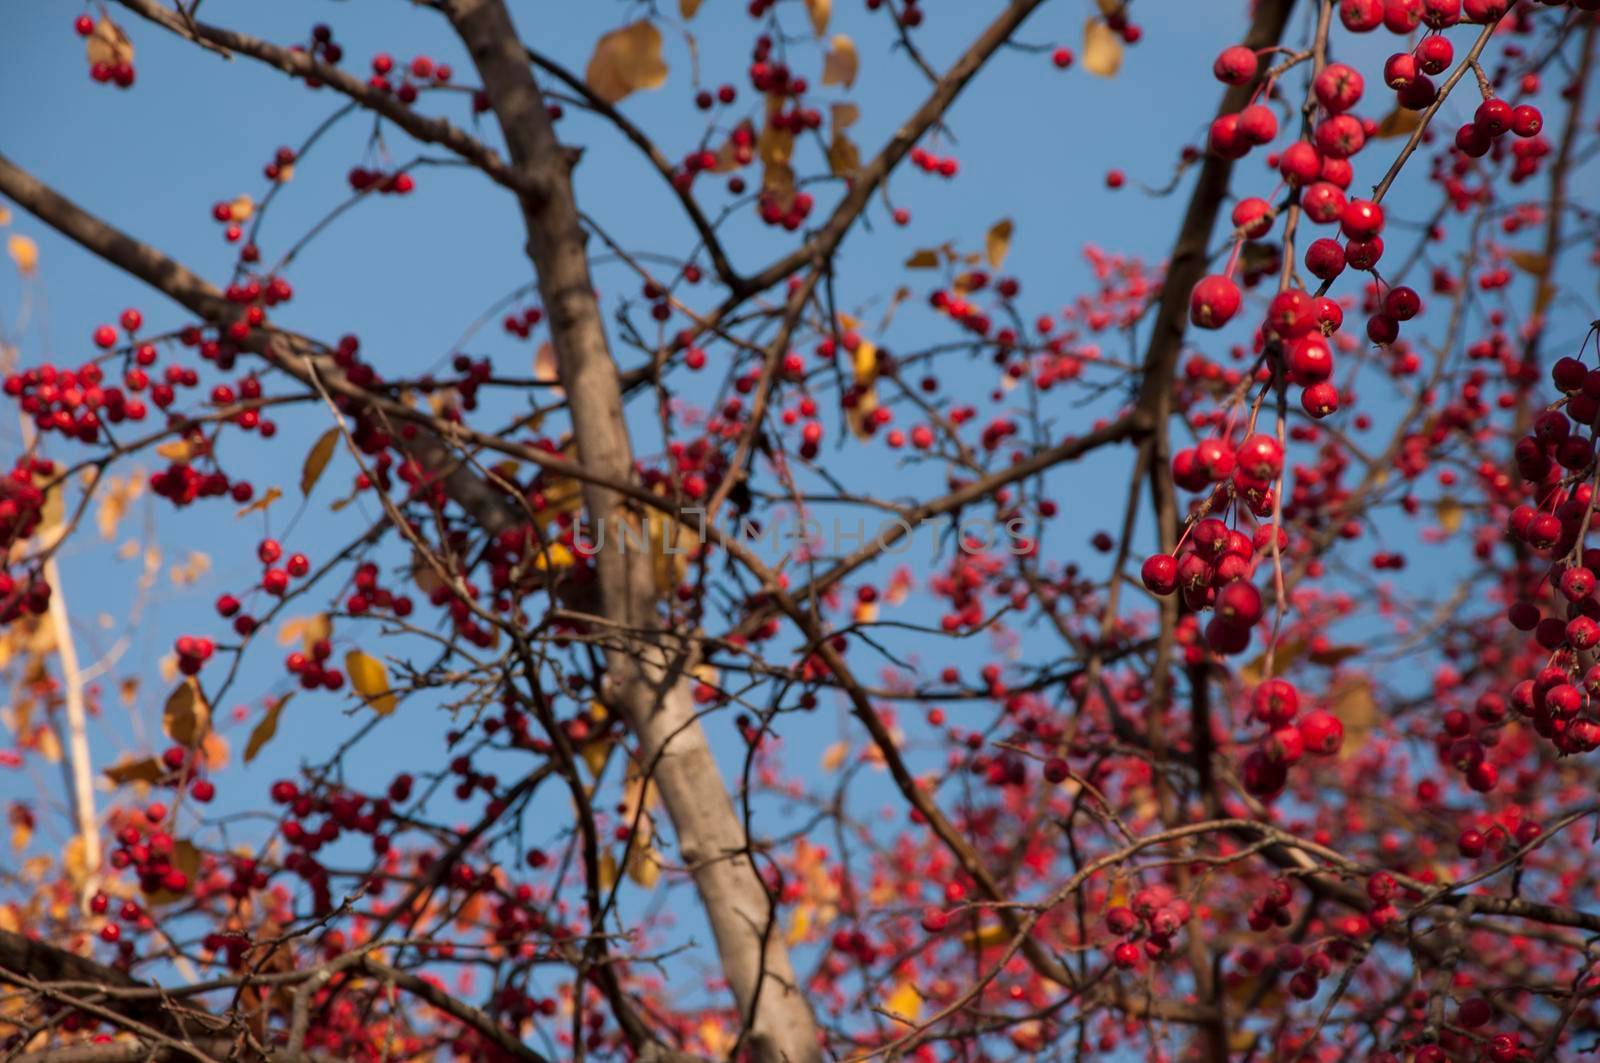 A bunch of wild apple tree with small bright red apples and green and yellow leaves is in a park in autumn